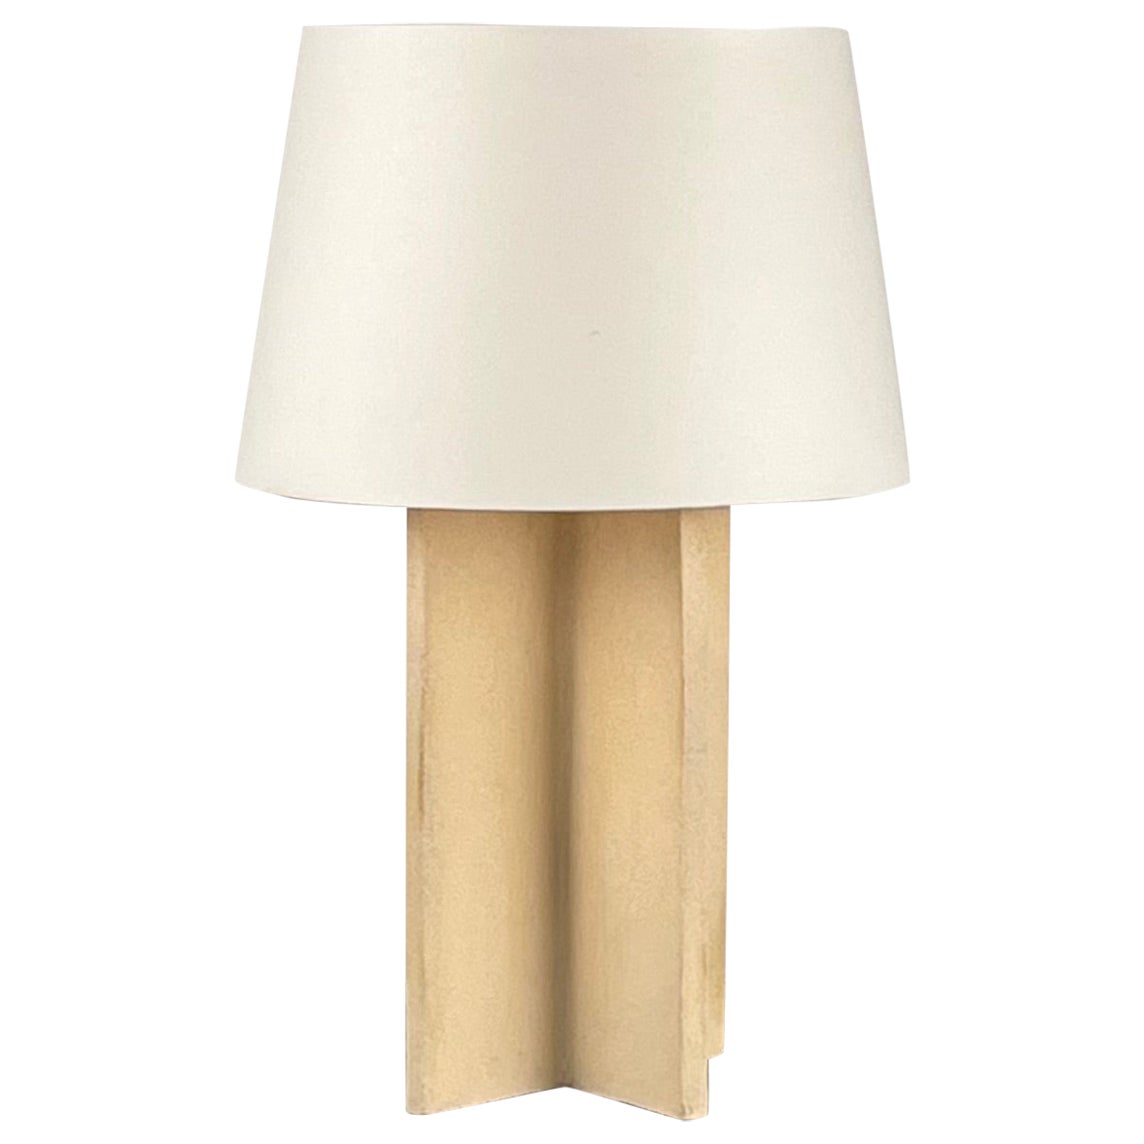 The 'Croisillon' Cream Ceramic Lamp with Parchment Shade by Design Frères